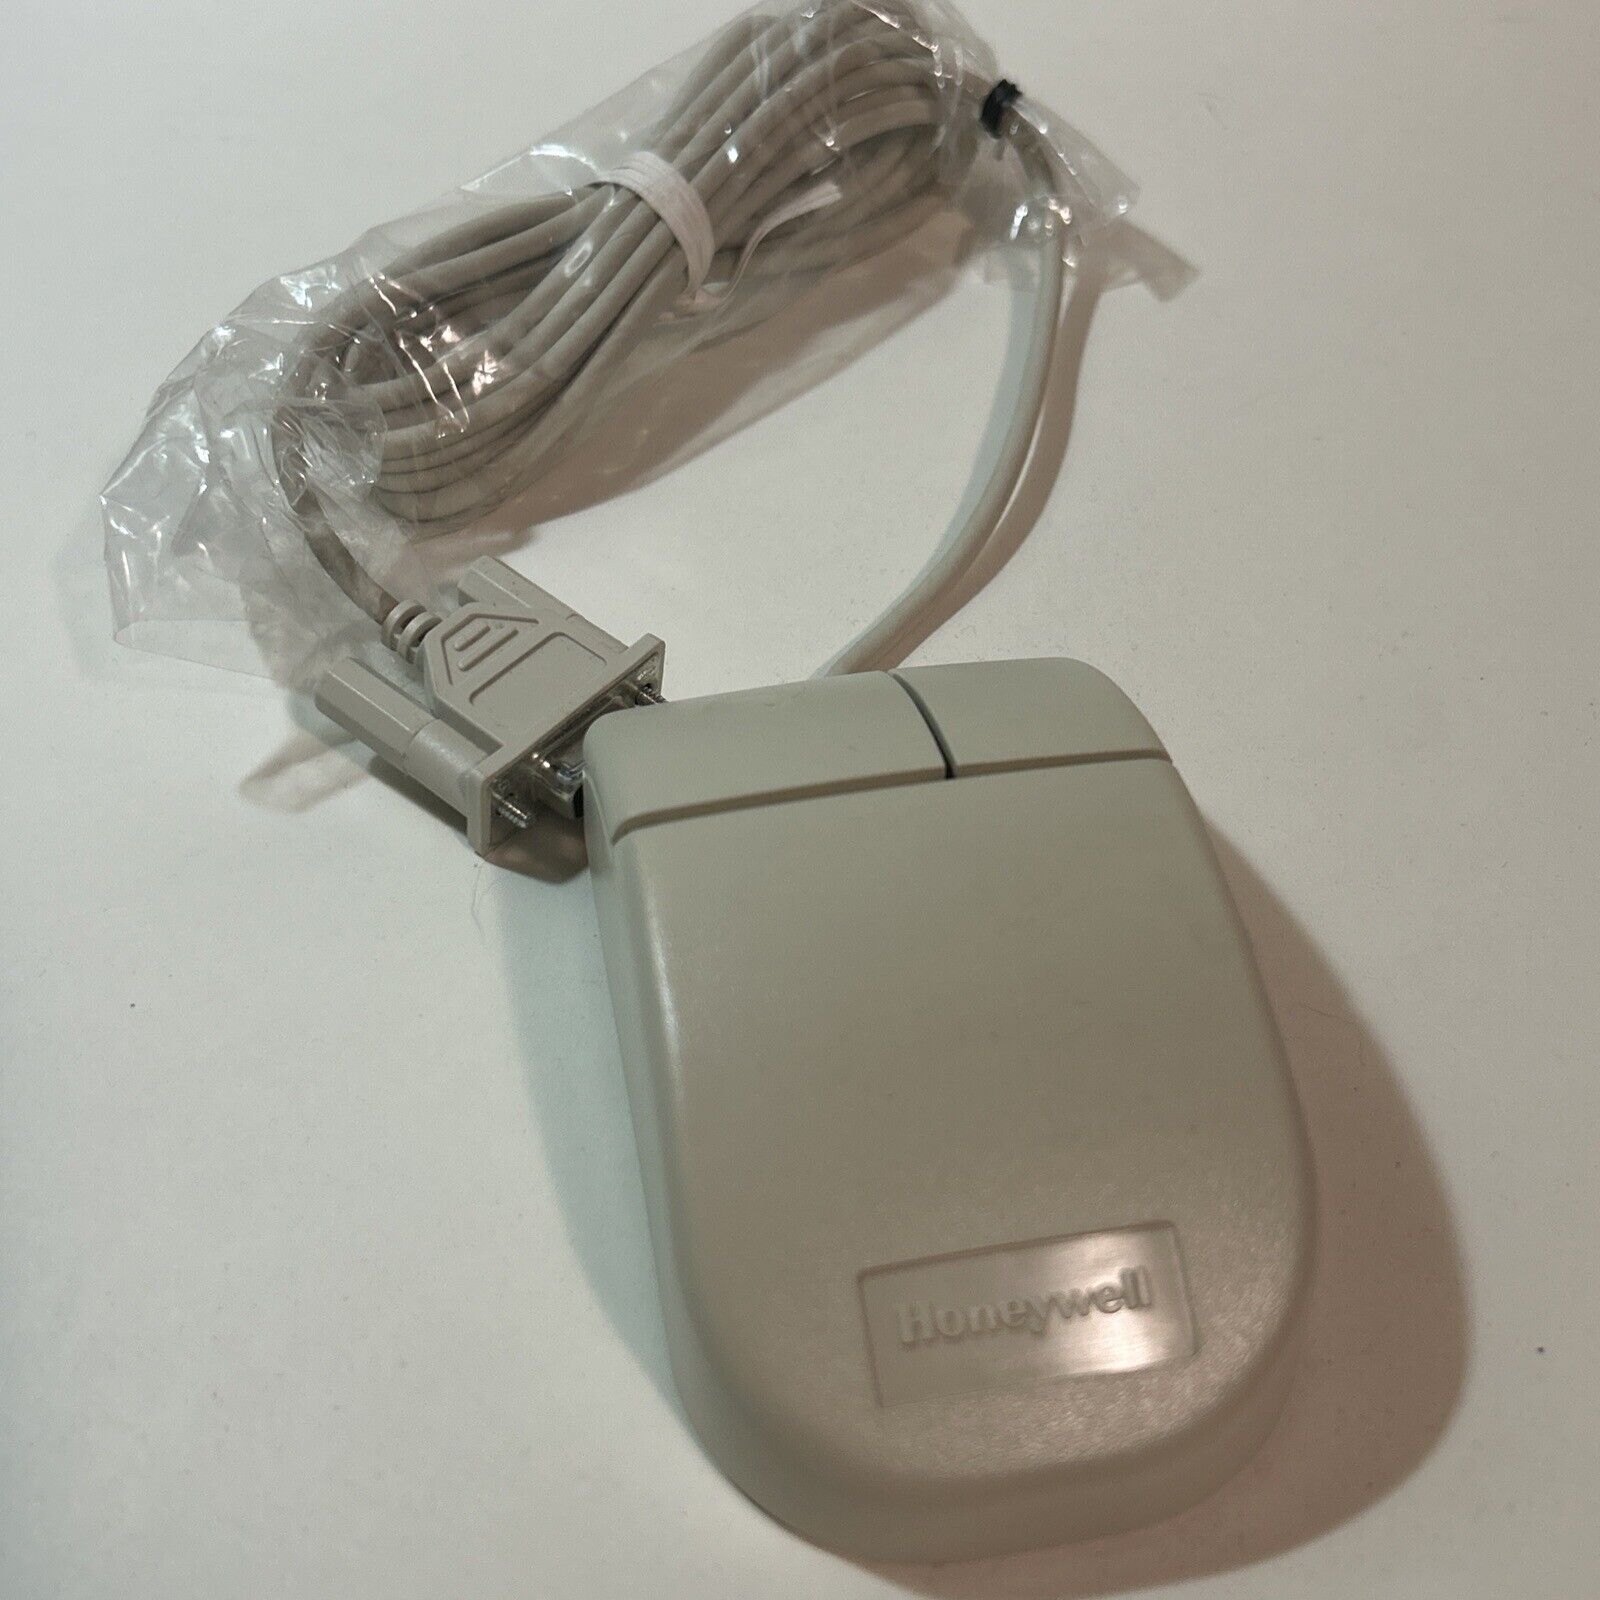 1992 Vintage Honeywell 2HW53-5E PC Compatible Mouse Opto-Mechanical PS/2 NEW